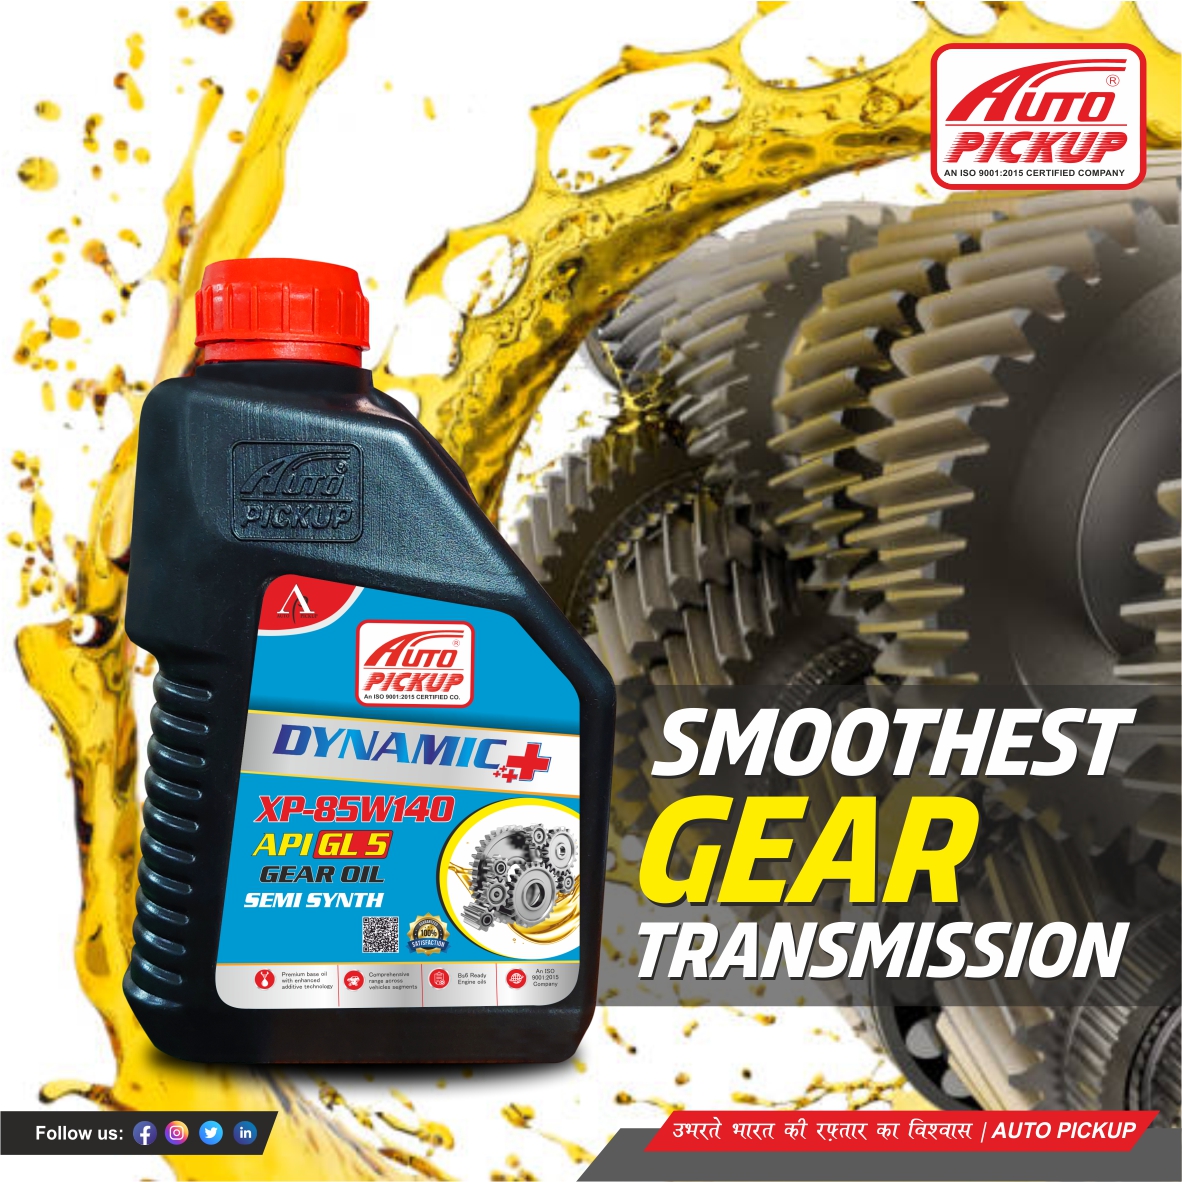 Auto Pickup Is top-quality 85W140 gear oil! 🚗🔧

Get more details connect with us on:
📲 wa.link/xekgd0
🌐 autopickup.in

#GearOil #VehicleMaintenance #AutoPickup #EngineProtection #Automotive #PerformanceMatters #SmoothRide #HeavyDuty #QualityOil